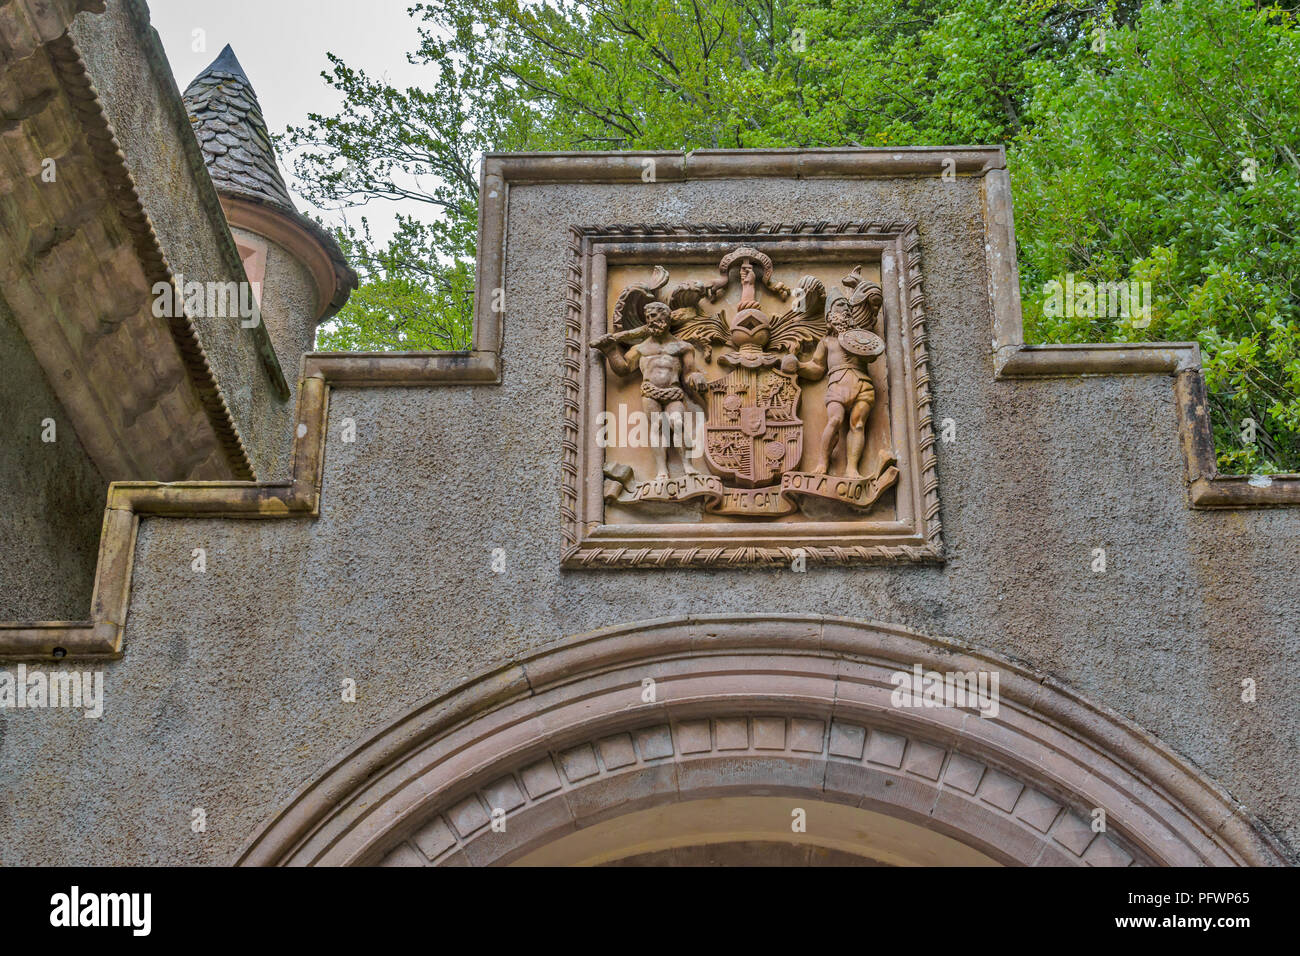 OLD BRIDGE OVER RIVER AVON SPEYSIDE SCOTLAND COAT OF ARMS ON THE BARONIAL GATEHOUSE LEADING TO BALLINDALLOCH CASTLE Stock Photo